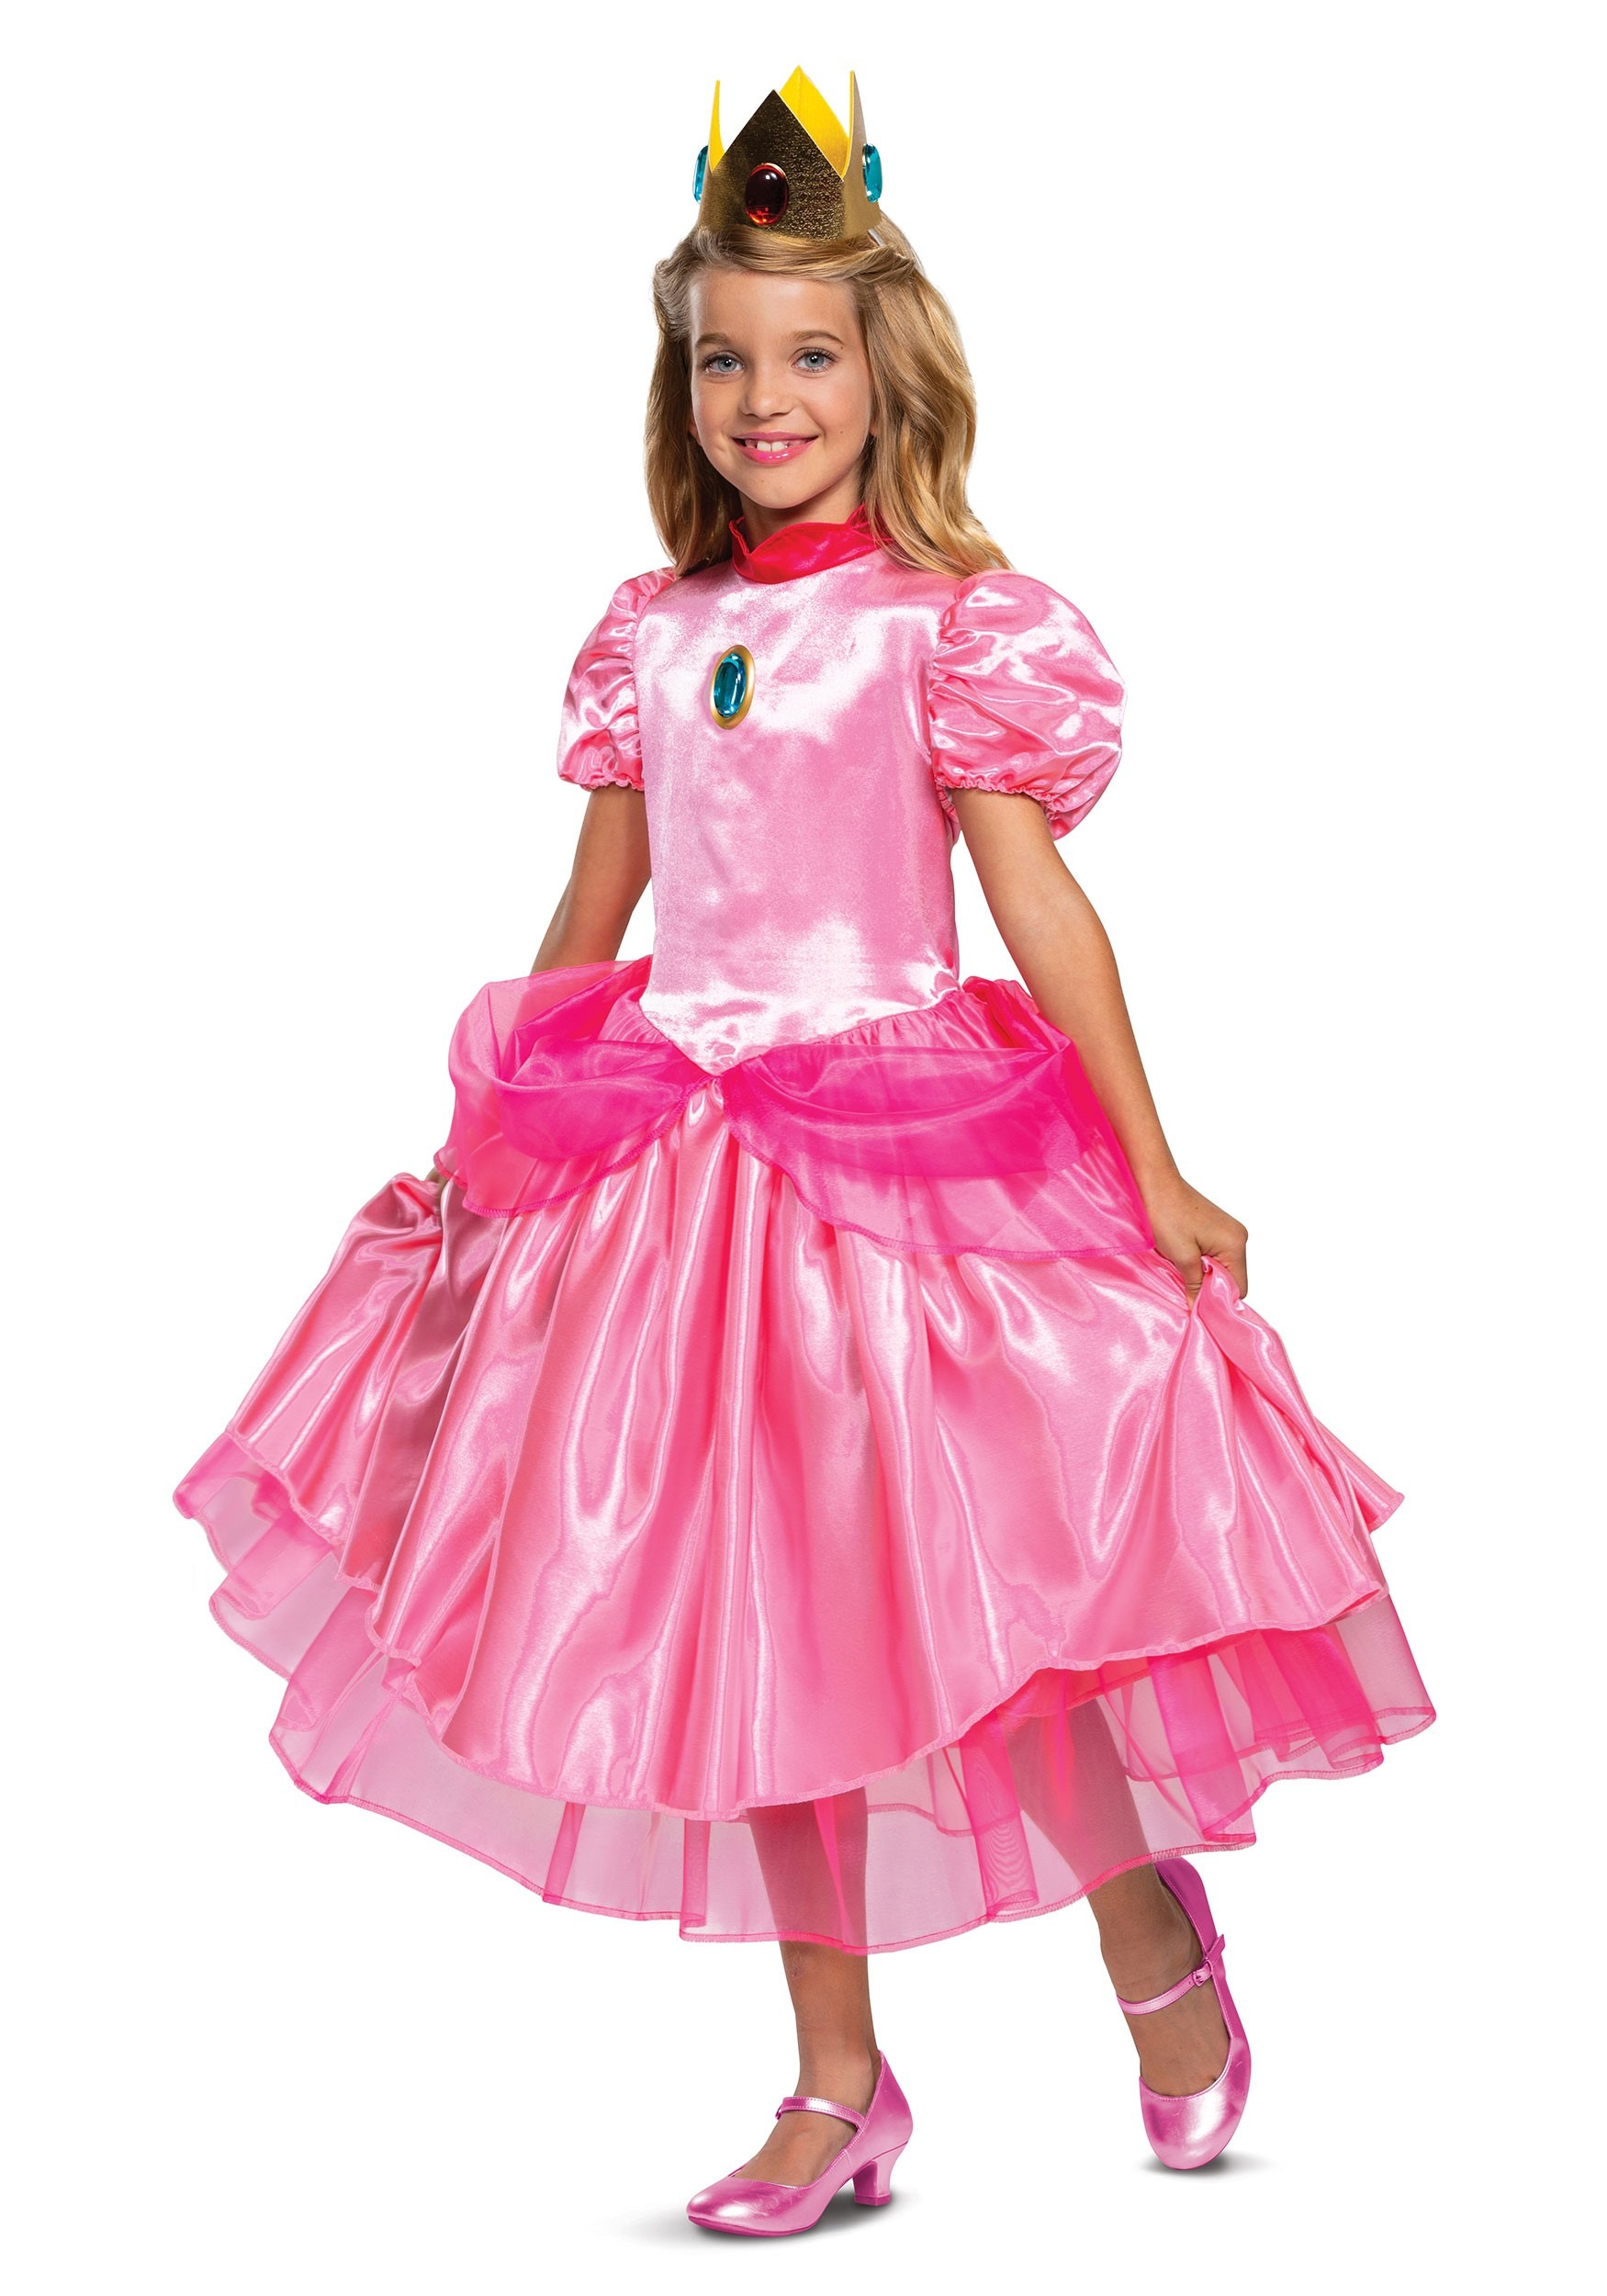 Photos - Fancy Dress Deluxe Disguise Super Mario  Princess Peach Costume for Girls Pink DI10691 